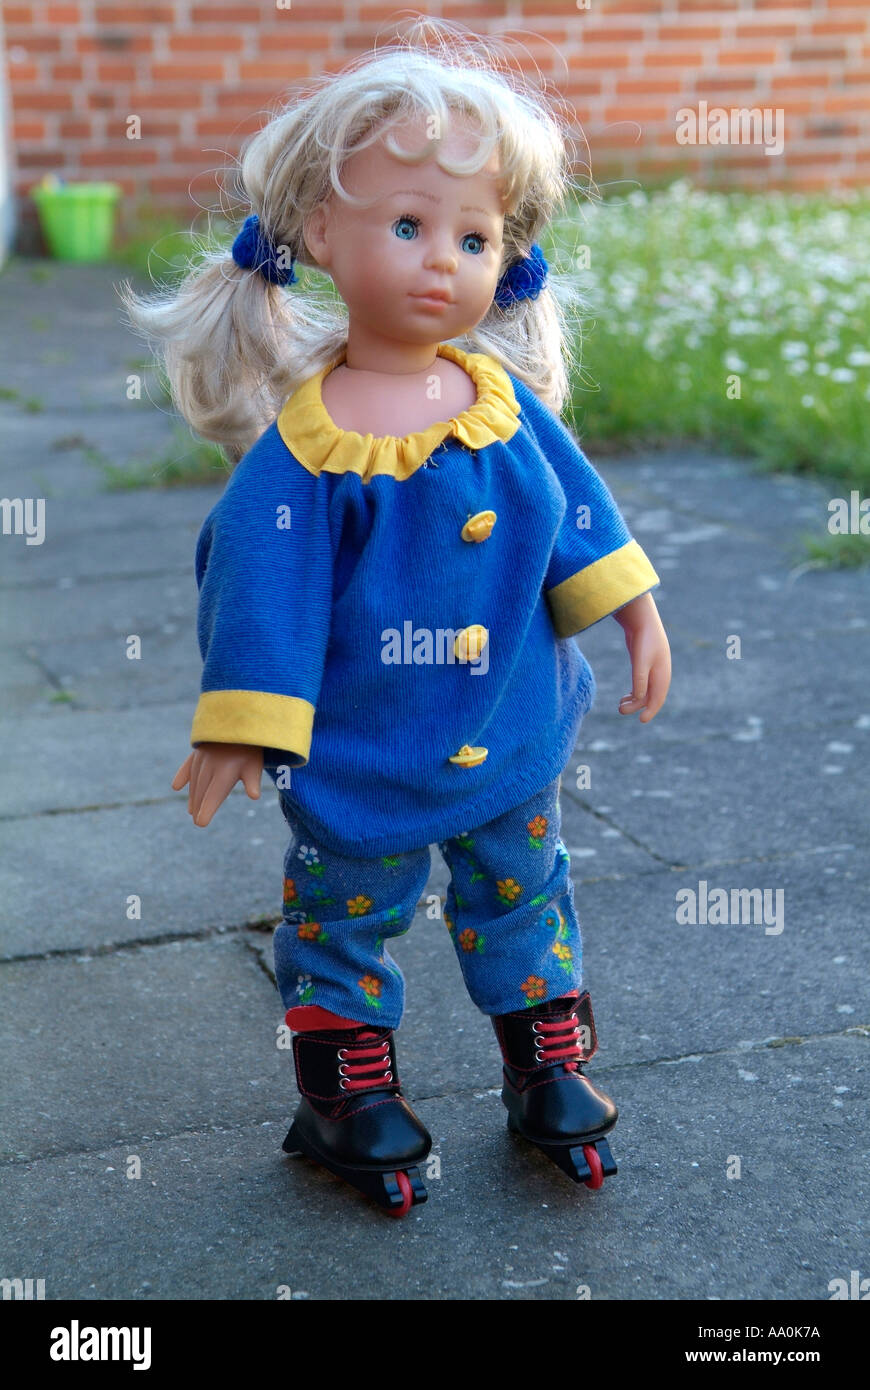 doll with inline skates Stock Photo